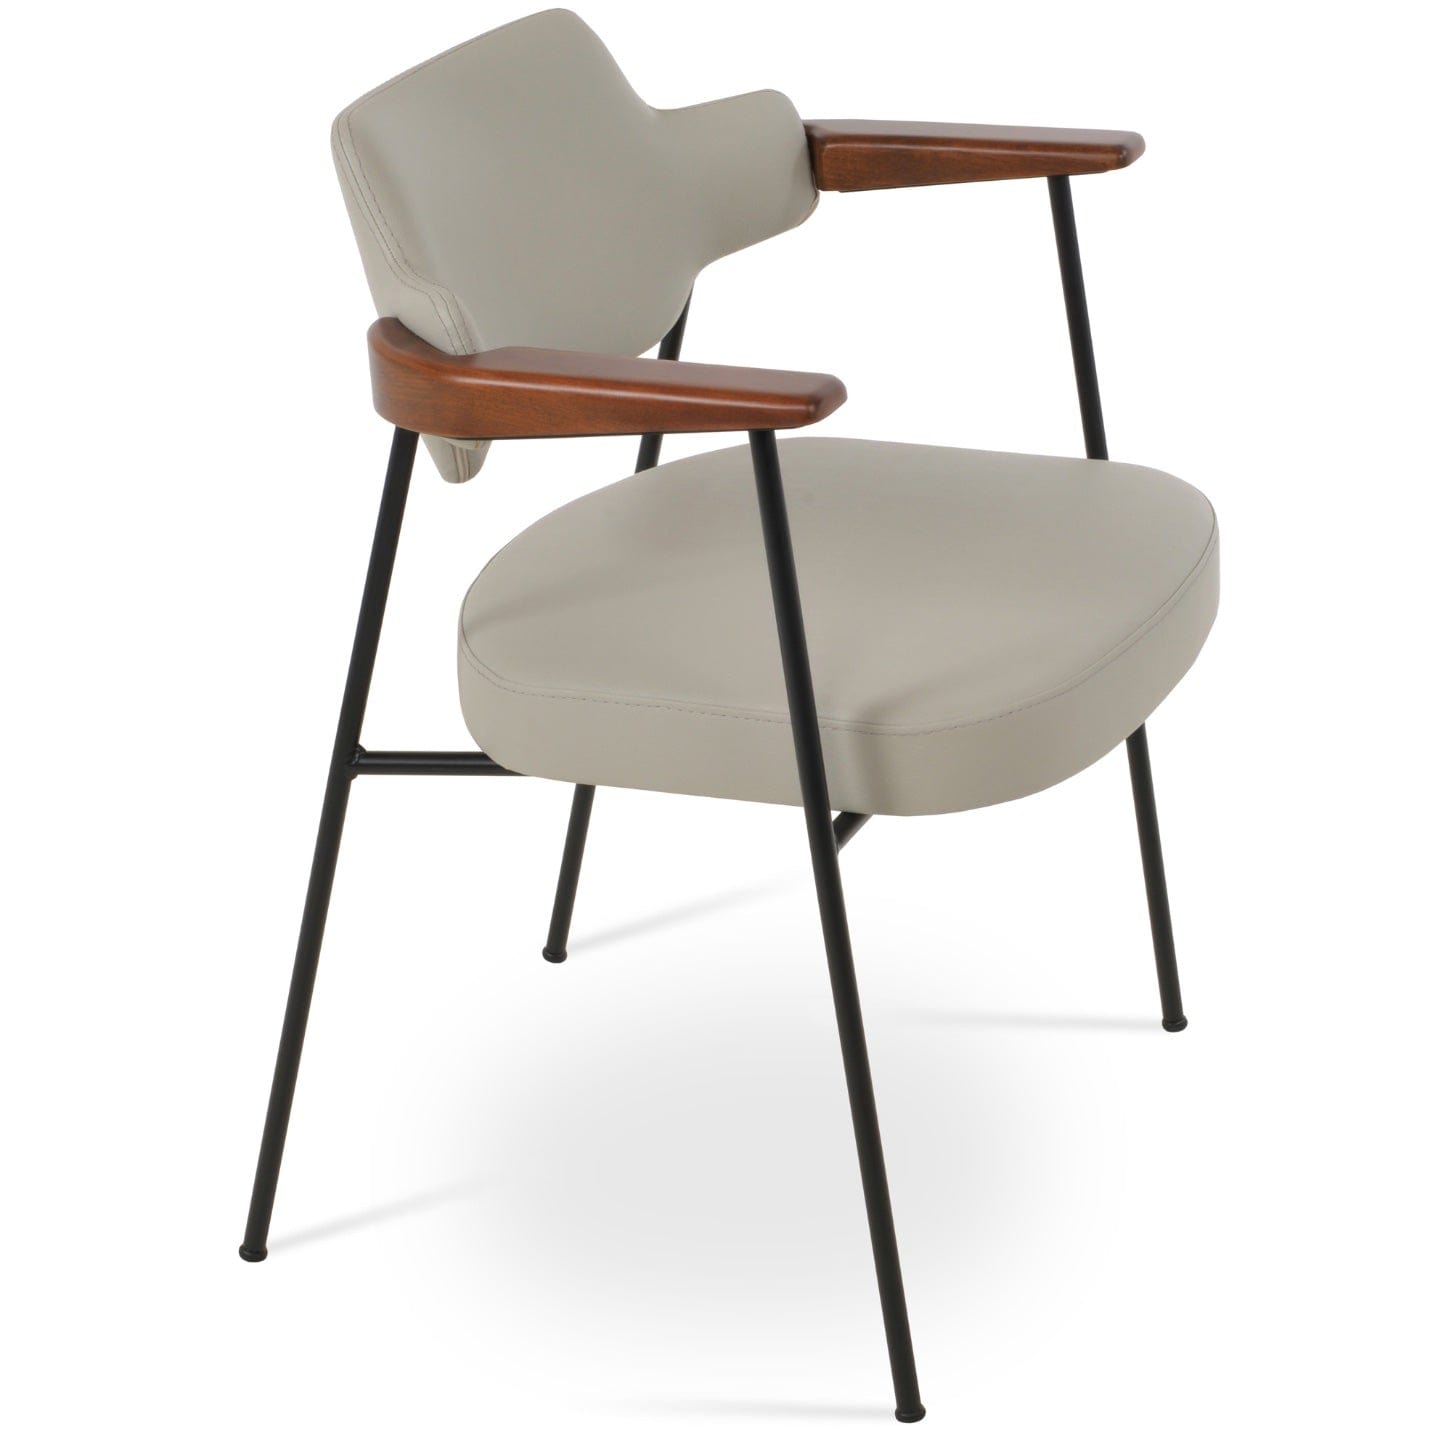 sohoConcept Kitchen & Dining Room Chairs Palu Metal Dining ArmChair | Beige Upholstered Dining Chair